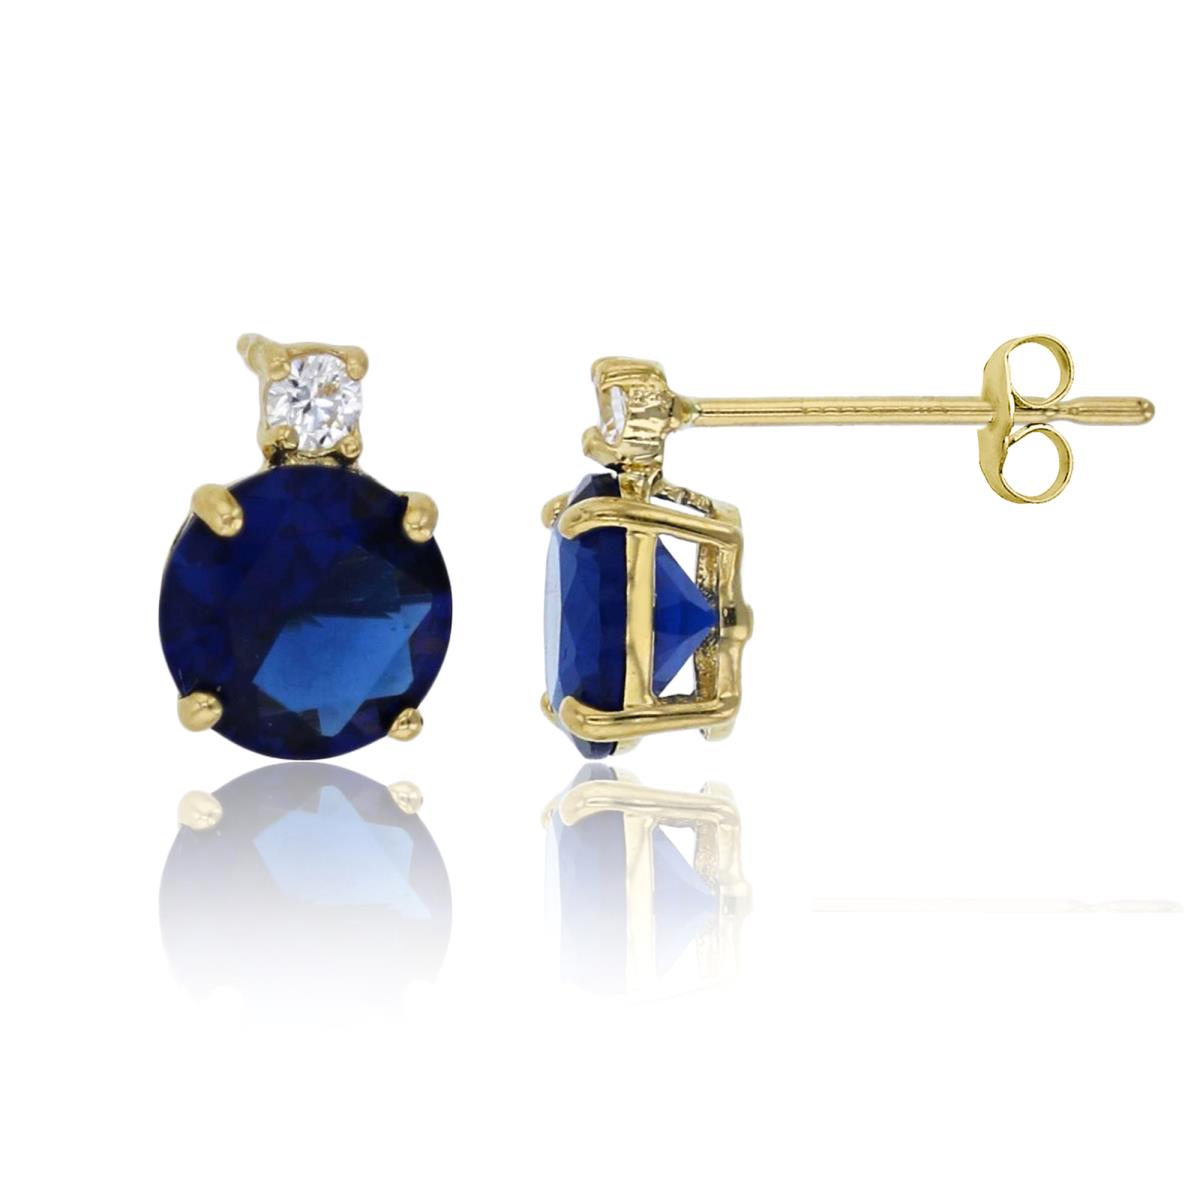 14K Yellow Gold 6mm Sapphire & 2mm White Round Cut CZ Stud Earring with 14K Clutch